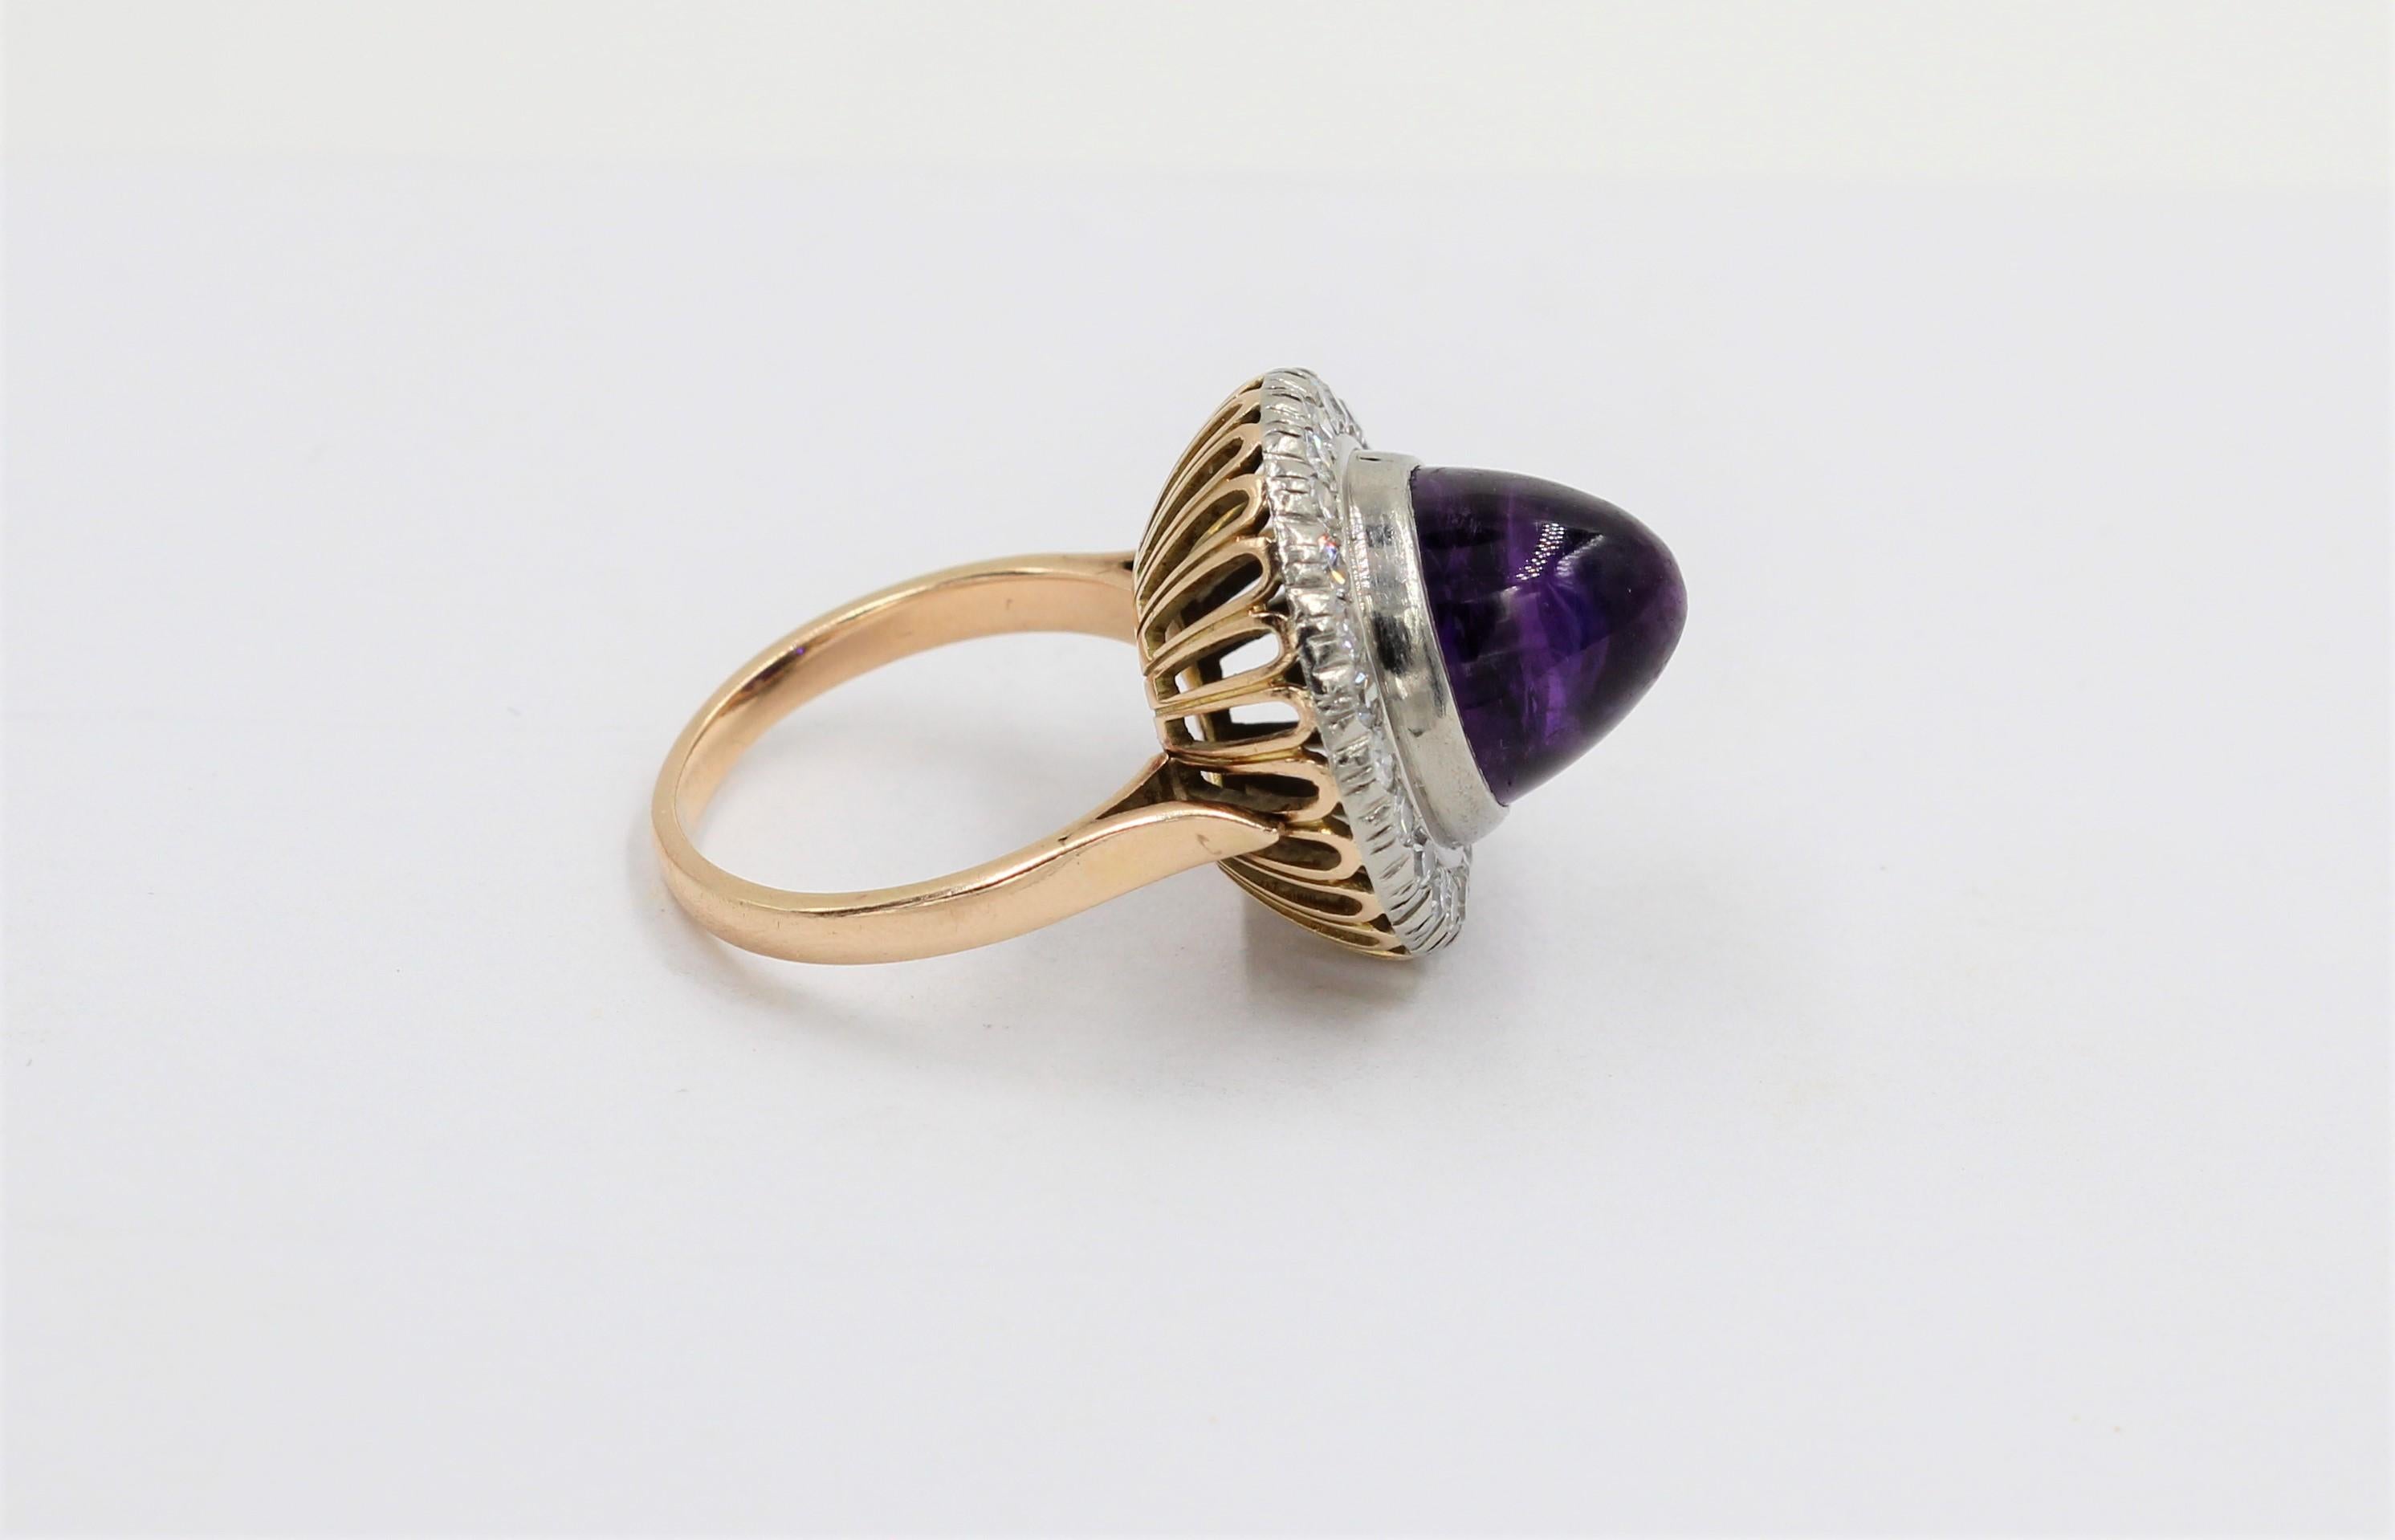 8 Carat Cabochon Amethyst Handcrafted in 14k and Platinum With 1.0 Diamonds.
One Cabochon Cut Amethyst weighing 8 carats approximately 
24 Round Brilliant Cut Diamonds weighing 1.0ct.
Handcrafted in 14k and platinum.

Purple Amethyst has been highly